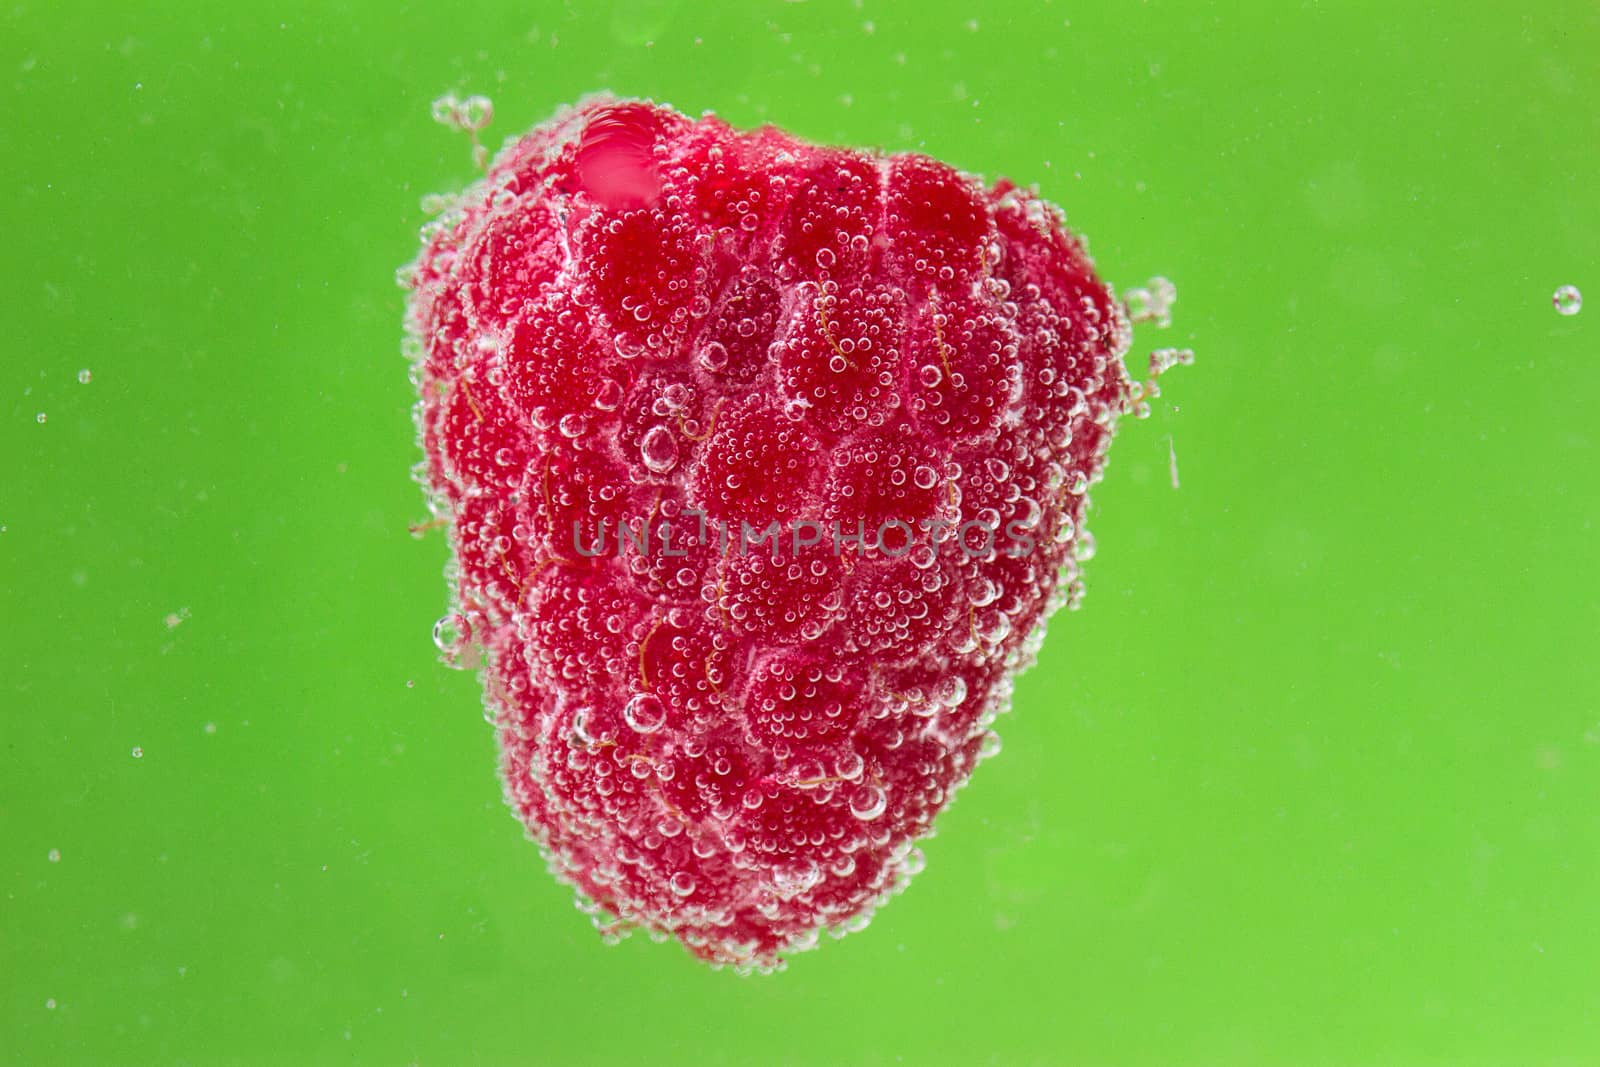 raspberries with bubbles in water